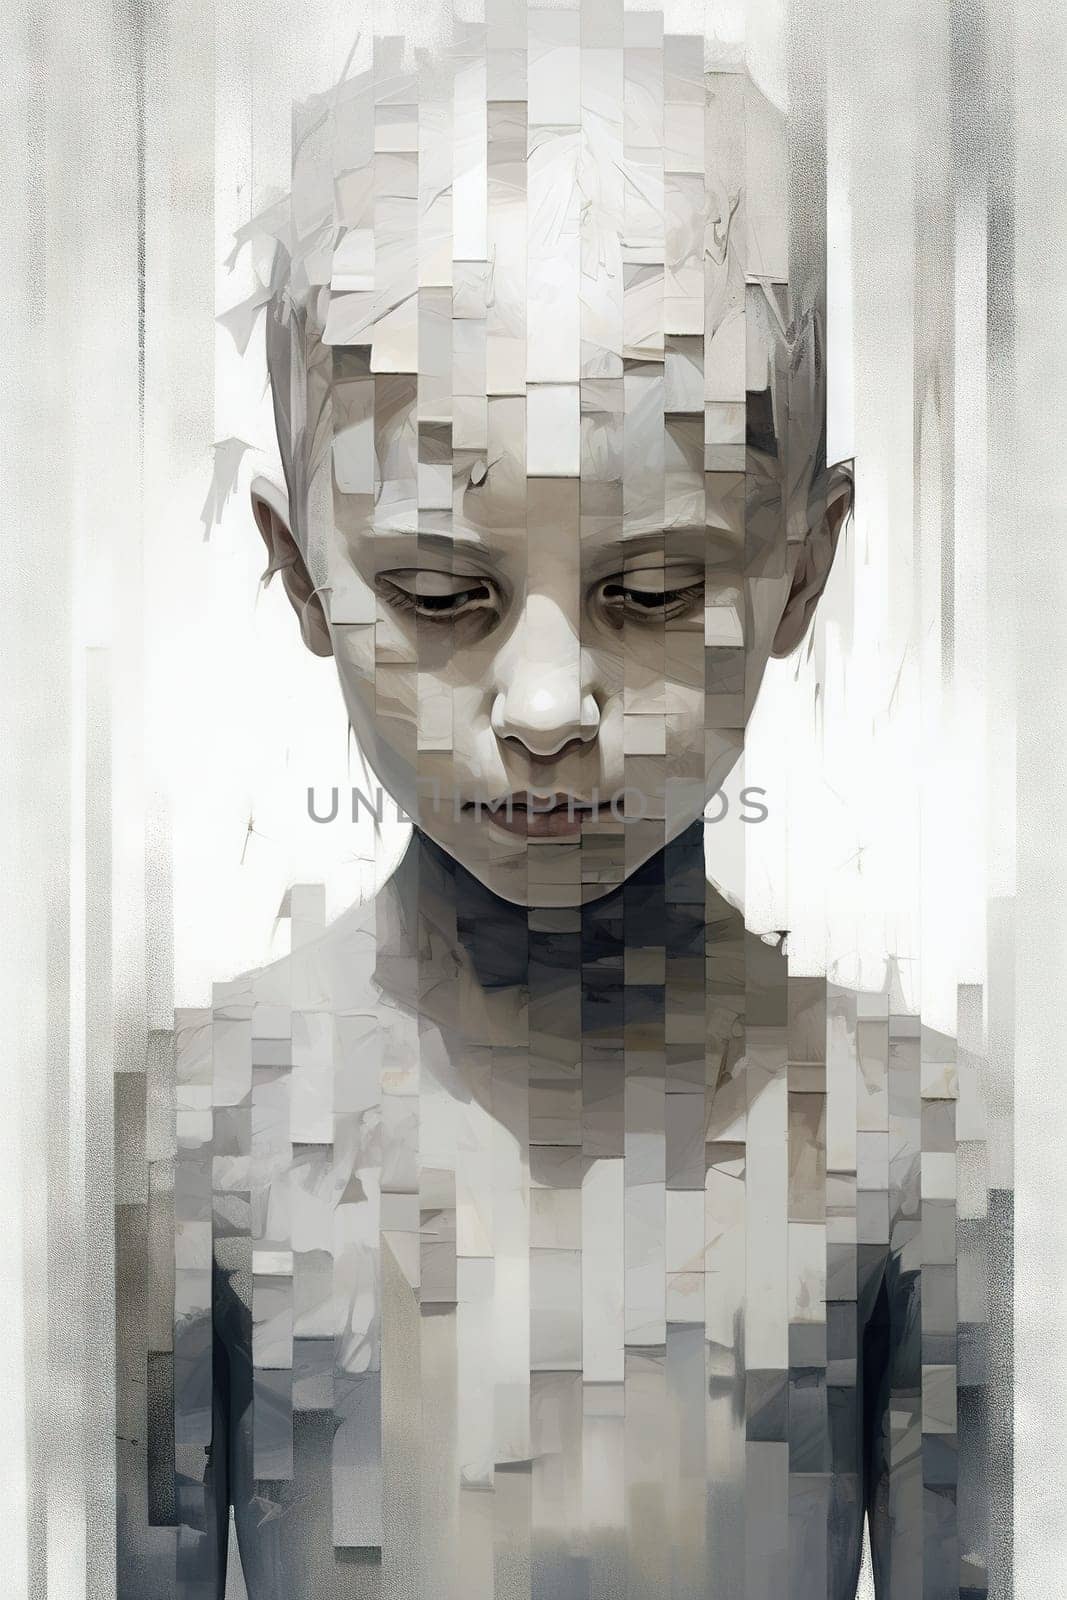 Pixelated child portrait in white and grey tones - generative AI - AI generated